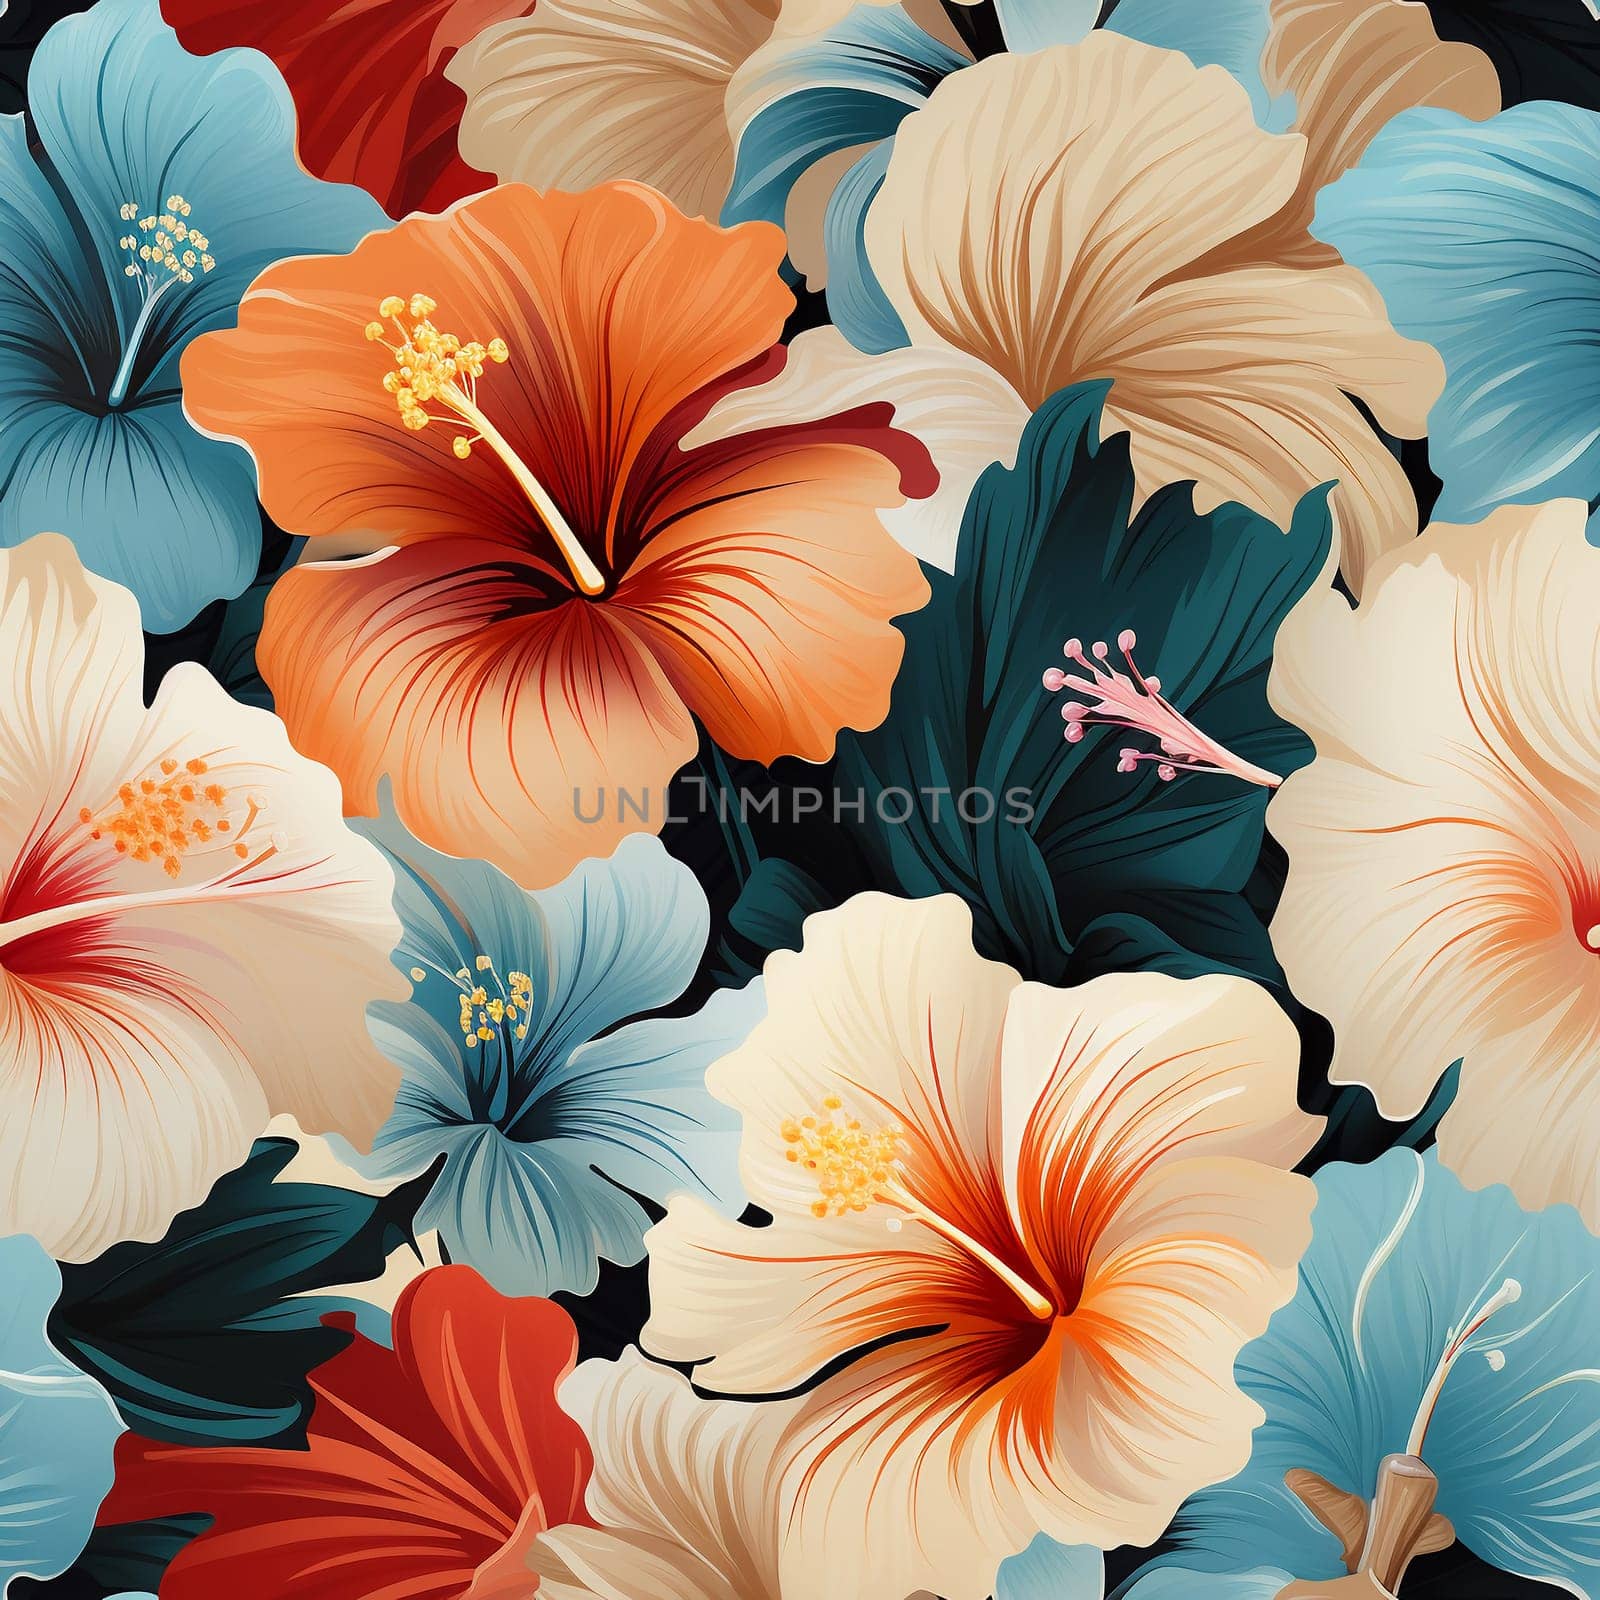 Seamless pattern tile background flowers and floral leaves plants. High quality photo